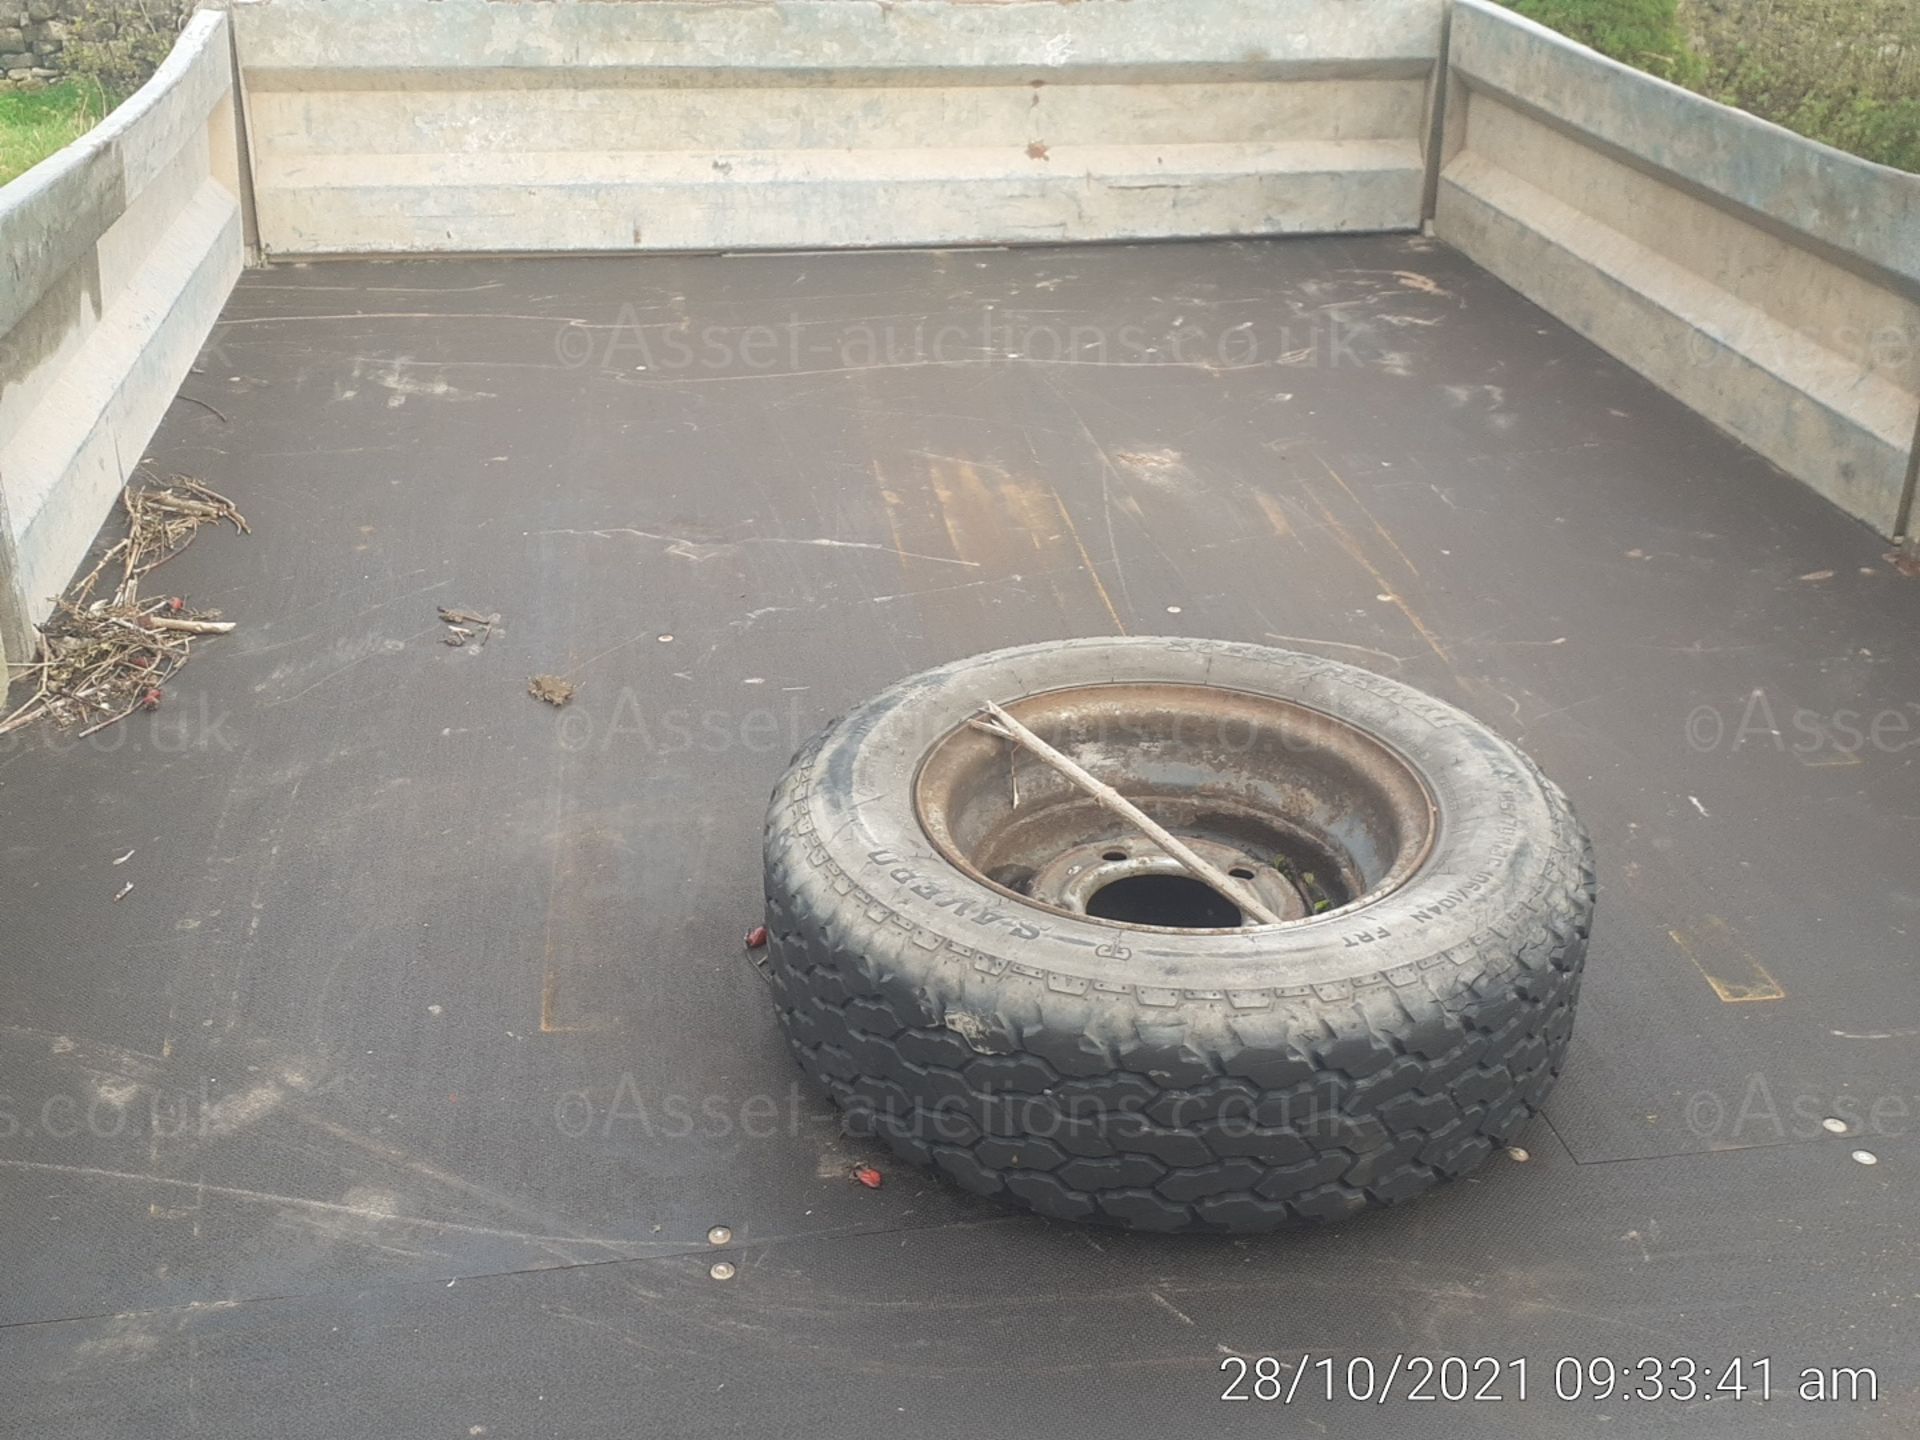 INDESPENSION 10 x 7ft DROPSIDE TRAILER, NEW TYRES AND BRAKE SERVICE, NEW BUFFALO BOARDS *PLUS VAT* - Image 7 of 7